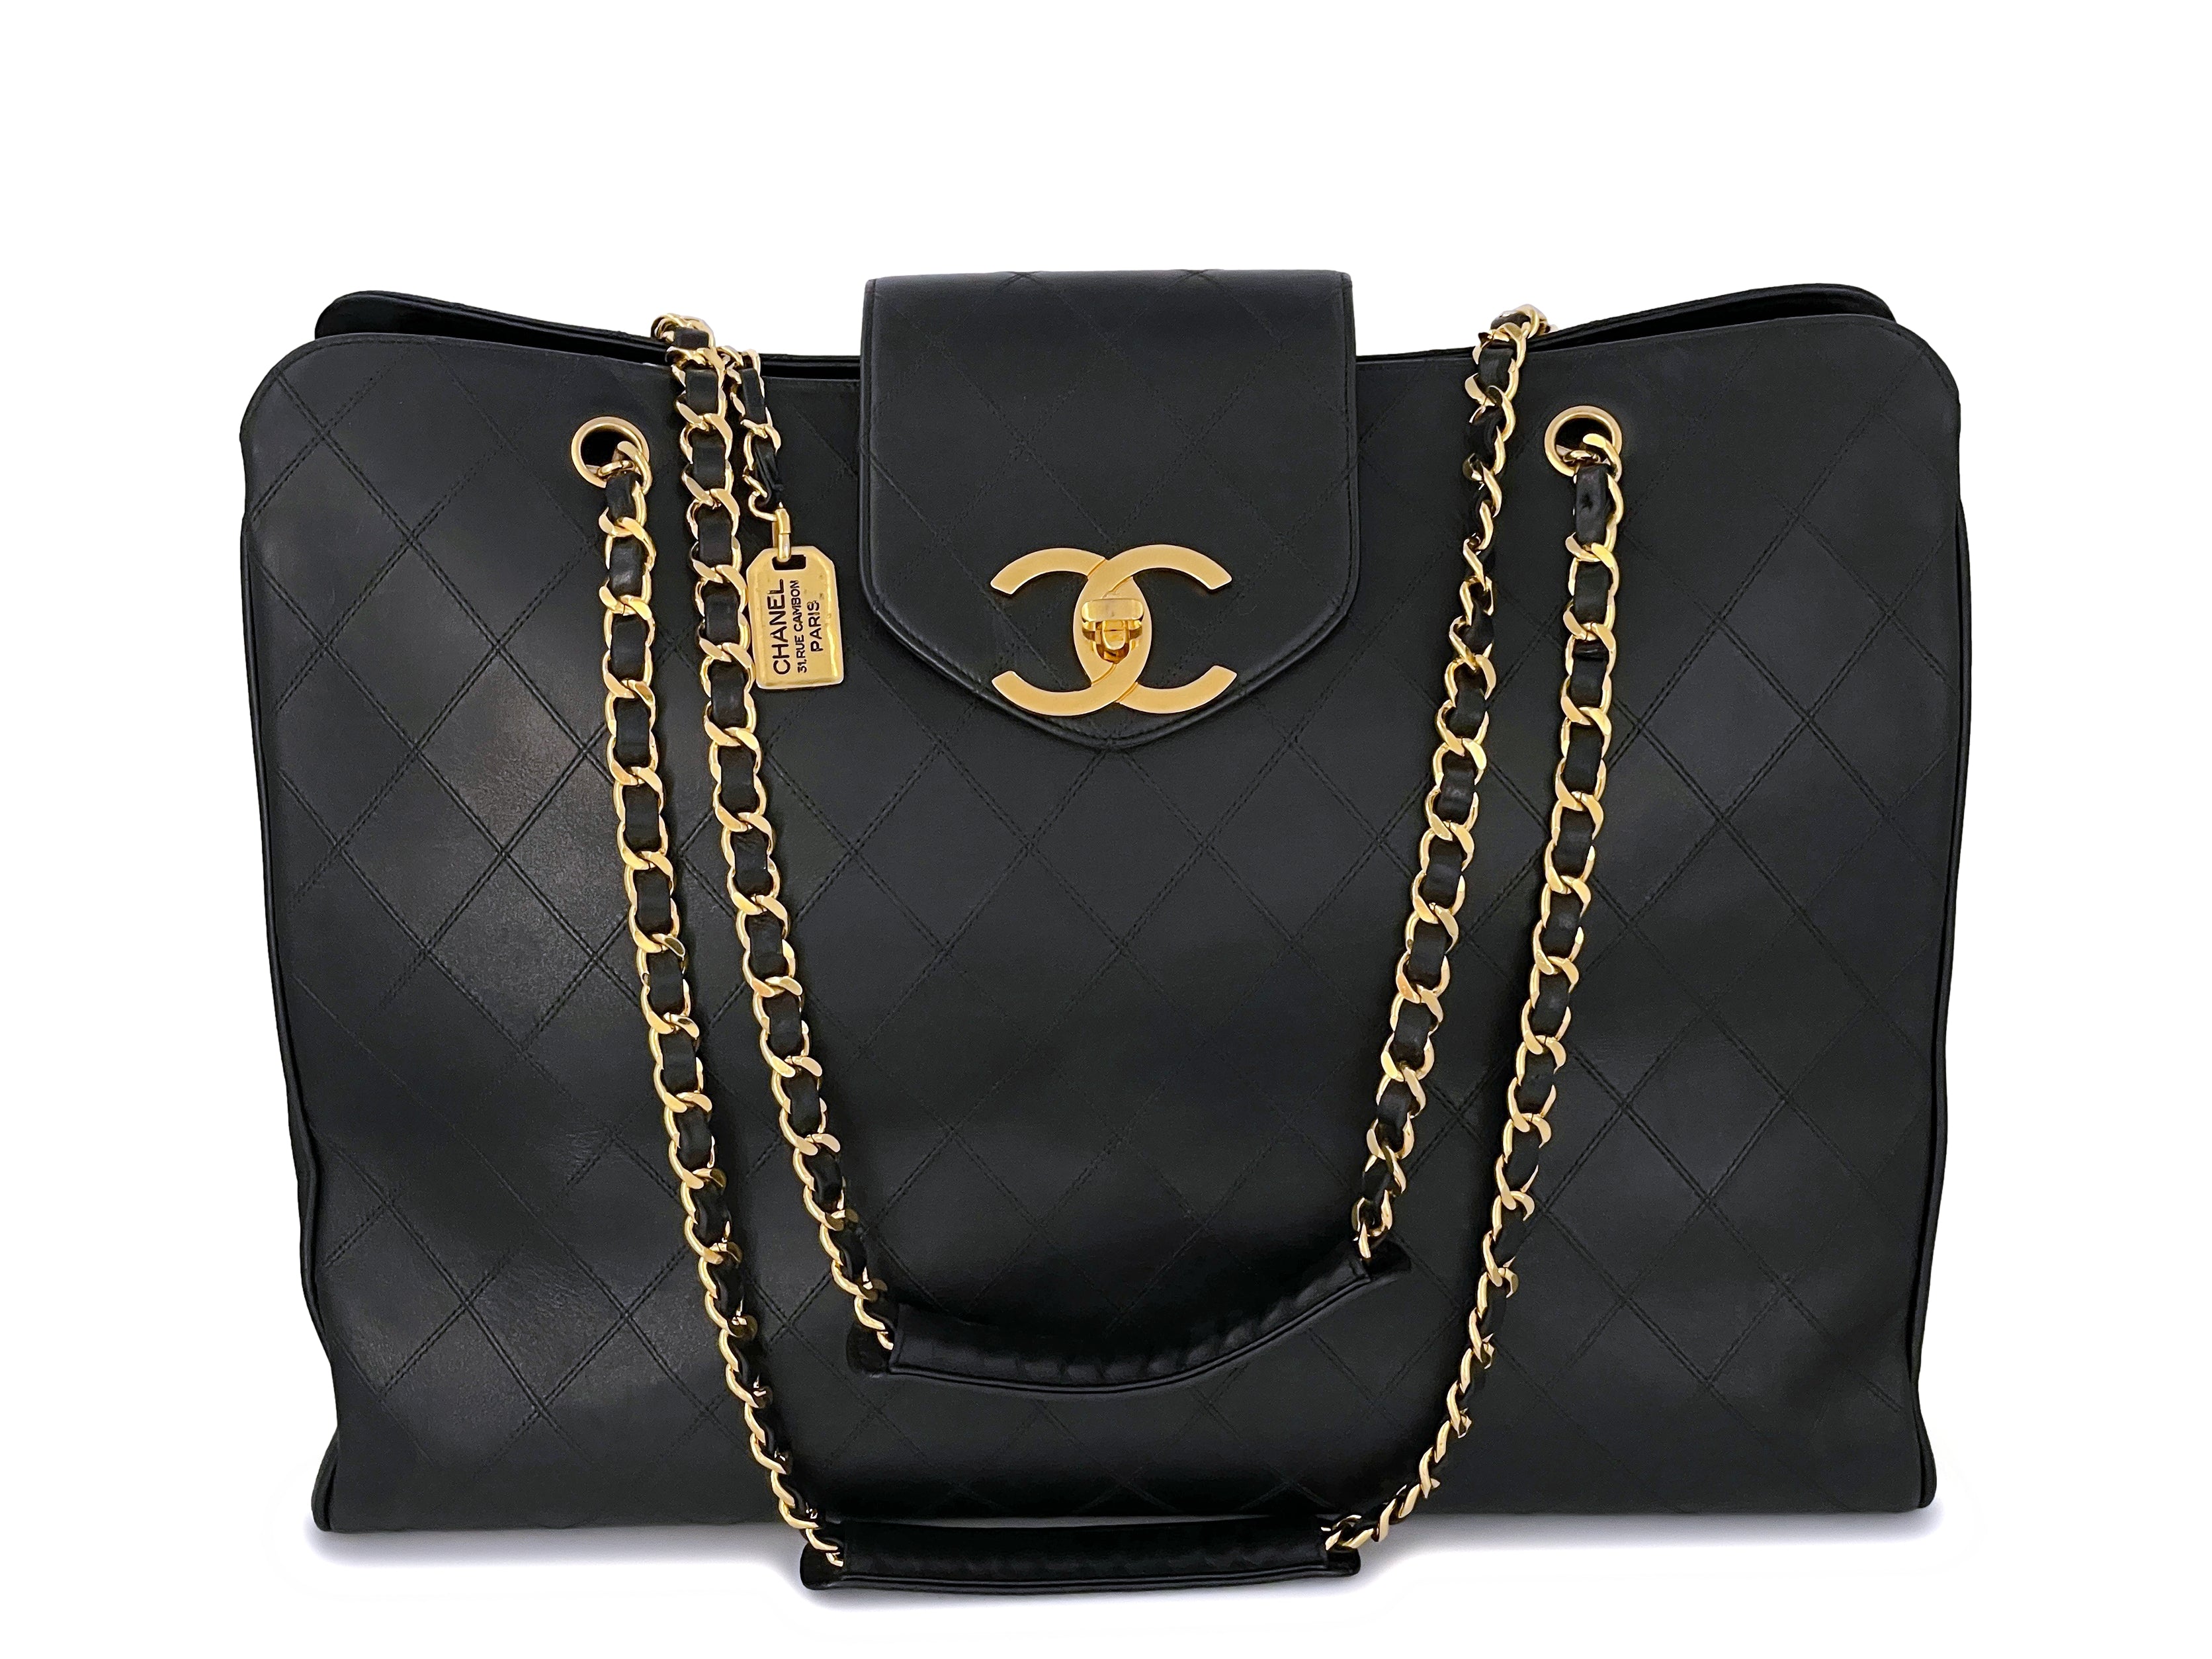 Black Handbag With Gold Chain - 714 For Sale on 1stDibs  black designer bag  with gold chain, black crossbody bag with gold chain, black leather purse  with gold chain